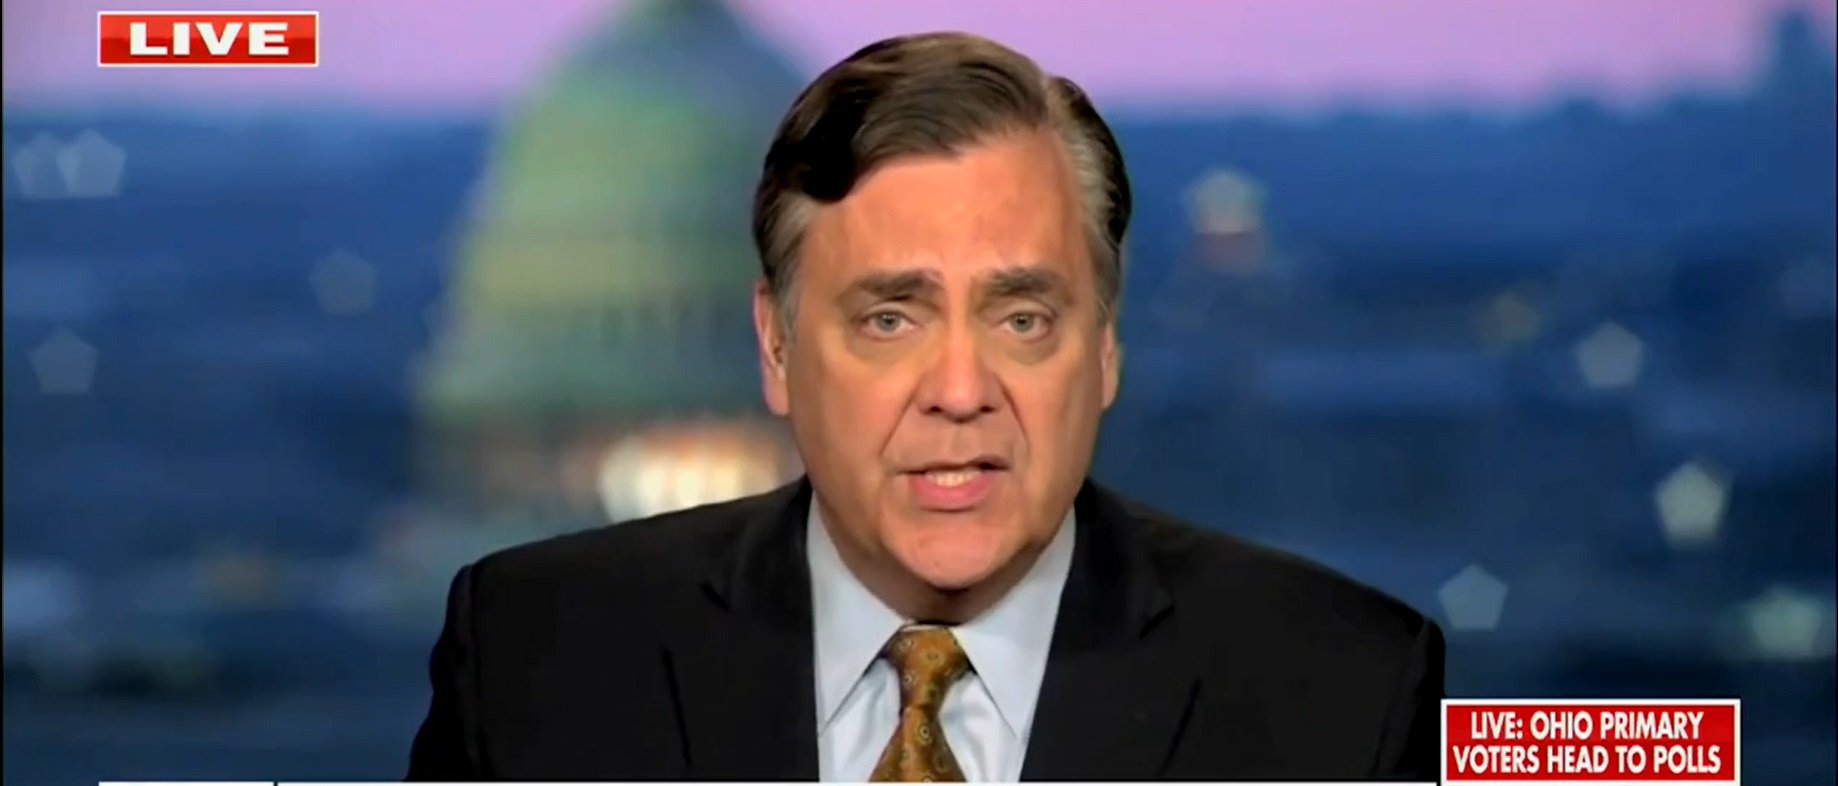 ‘Don’t Want To Get In The Crosshairs’: Turley Says Banks Fear Retaliation If They Loan Trump Bond Money